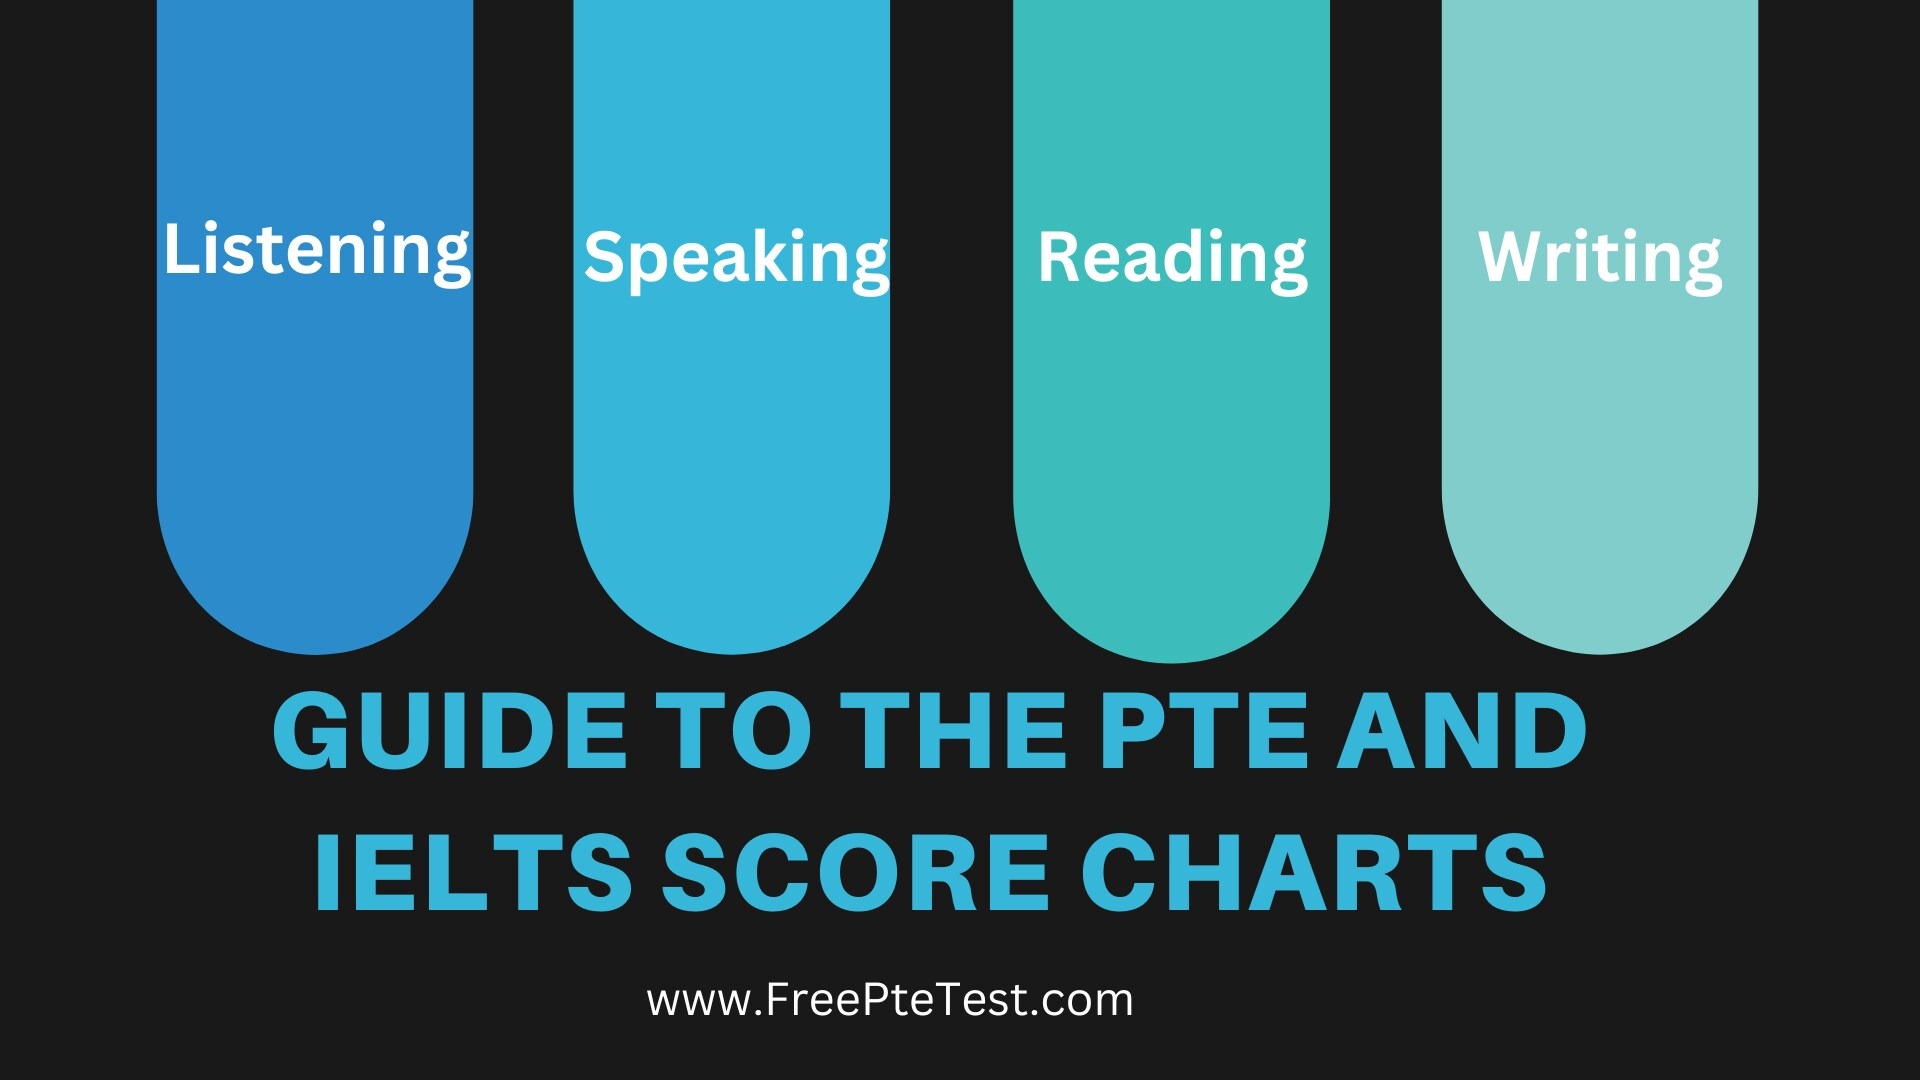 Guide to the PTE and IELTS Score Charts